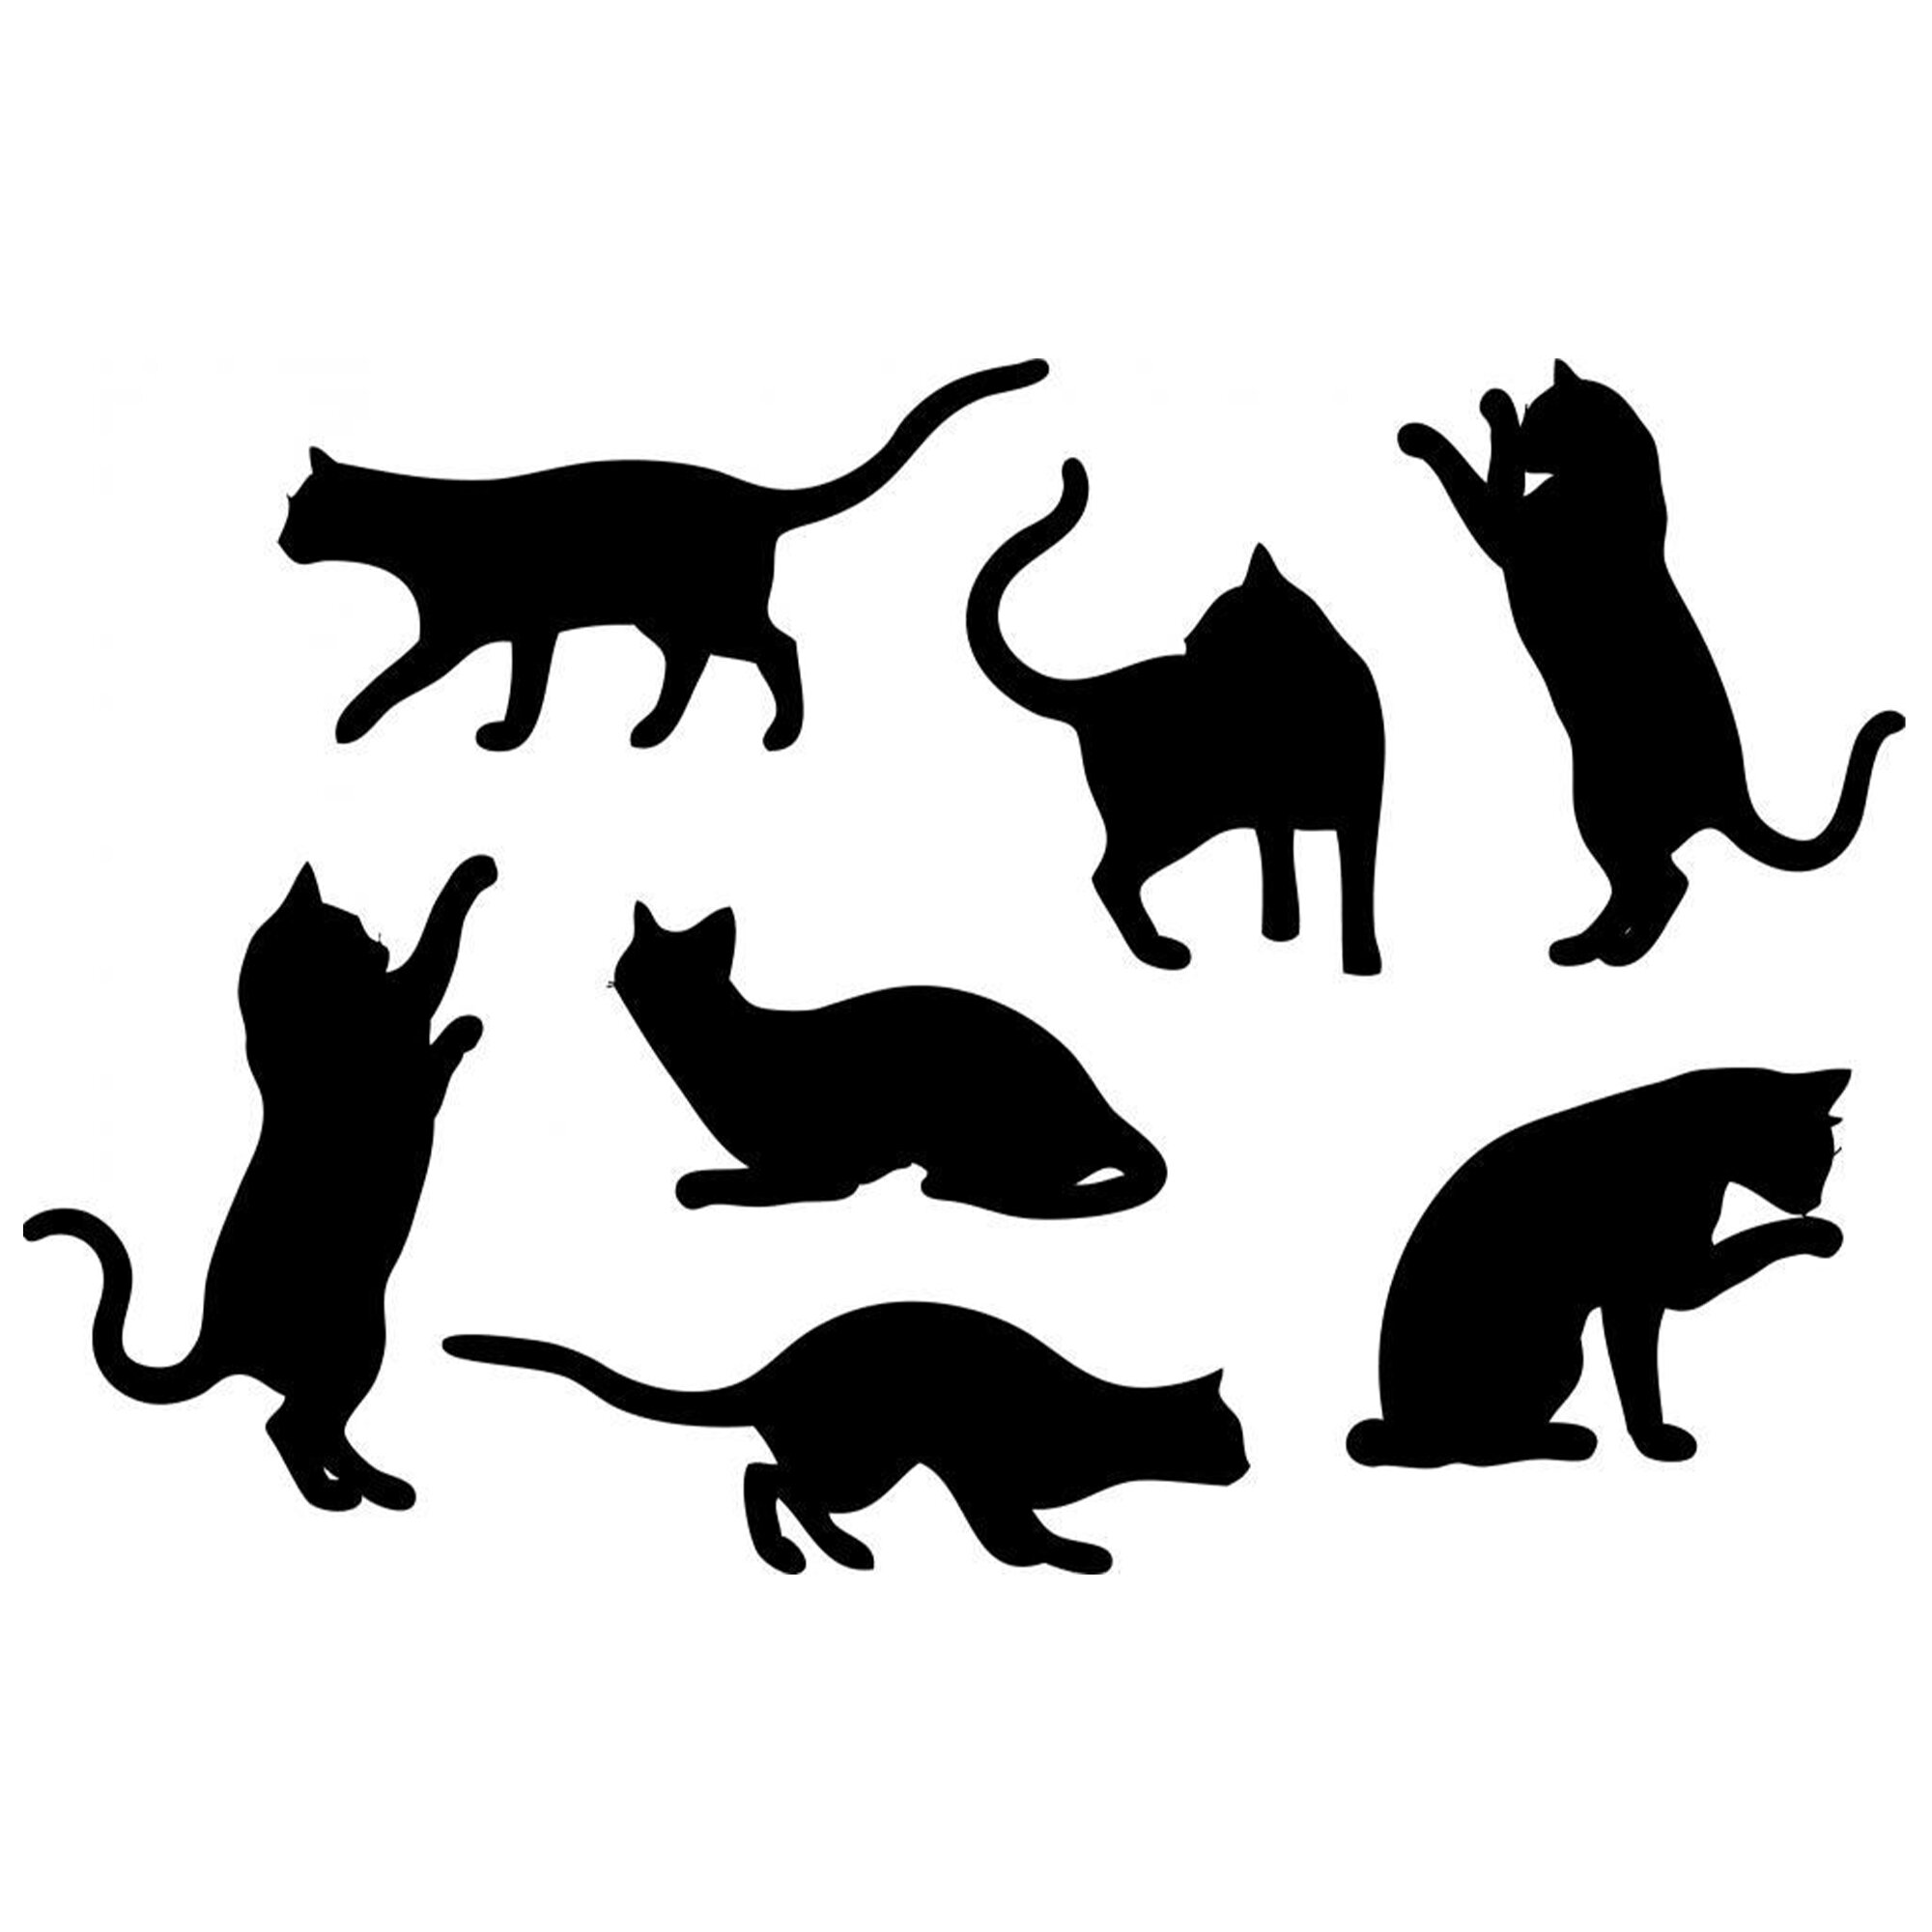 cats 6 to 16 cm 30x30cm Sticker planche silhouettes cats of all kinds